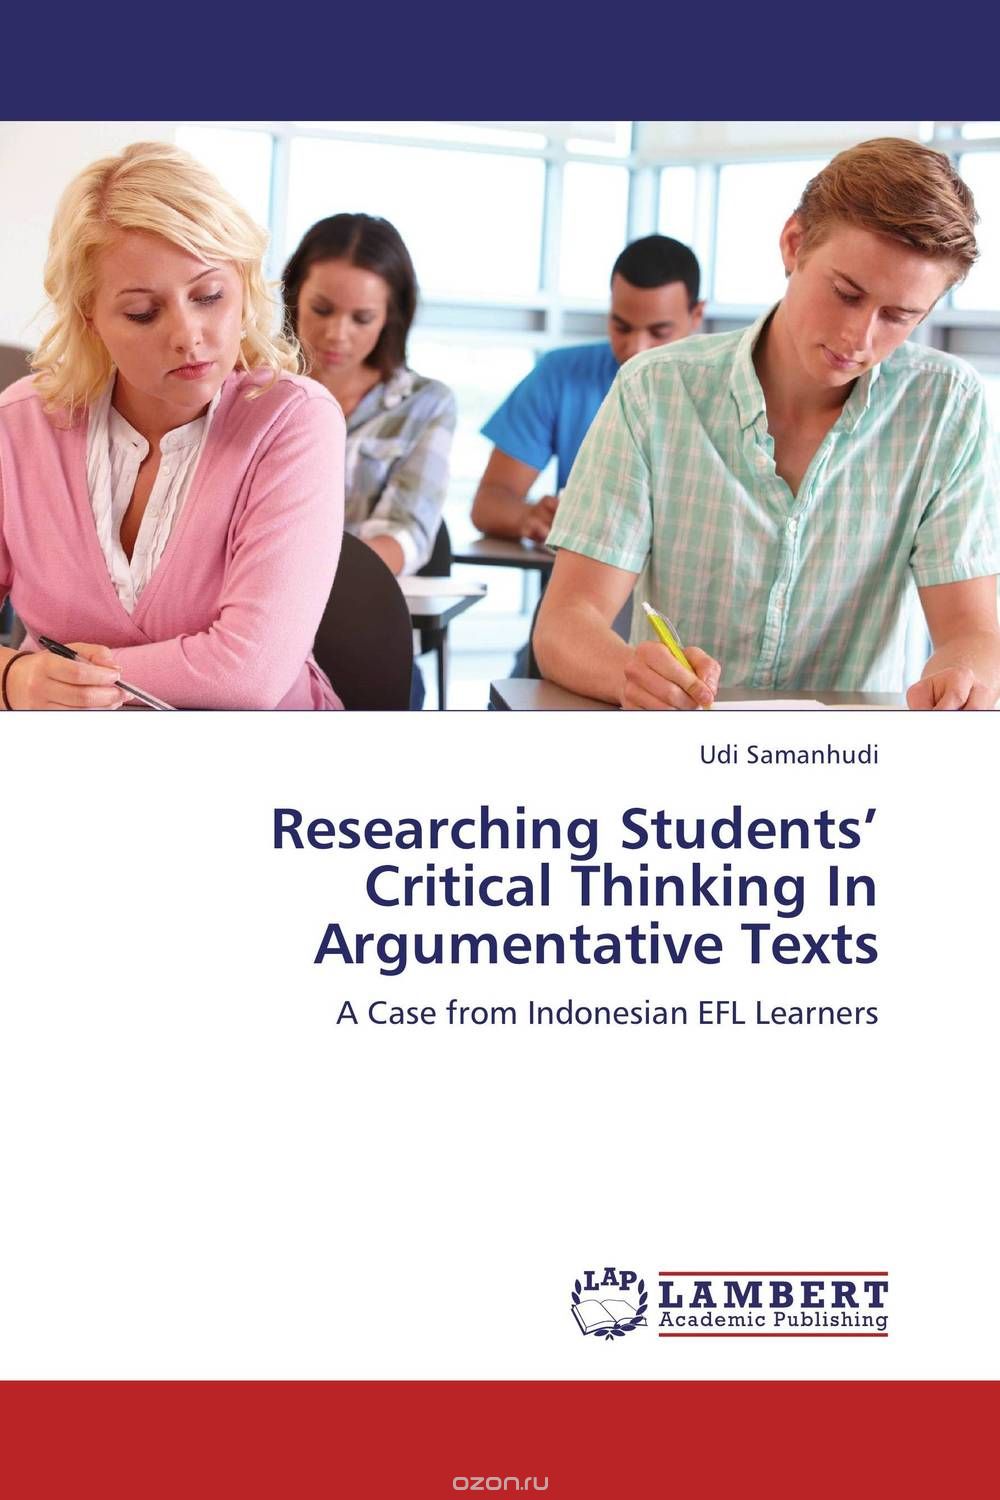 Скачать книгу "Researching Students’ Critical Thinking In Argumentative Texts"